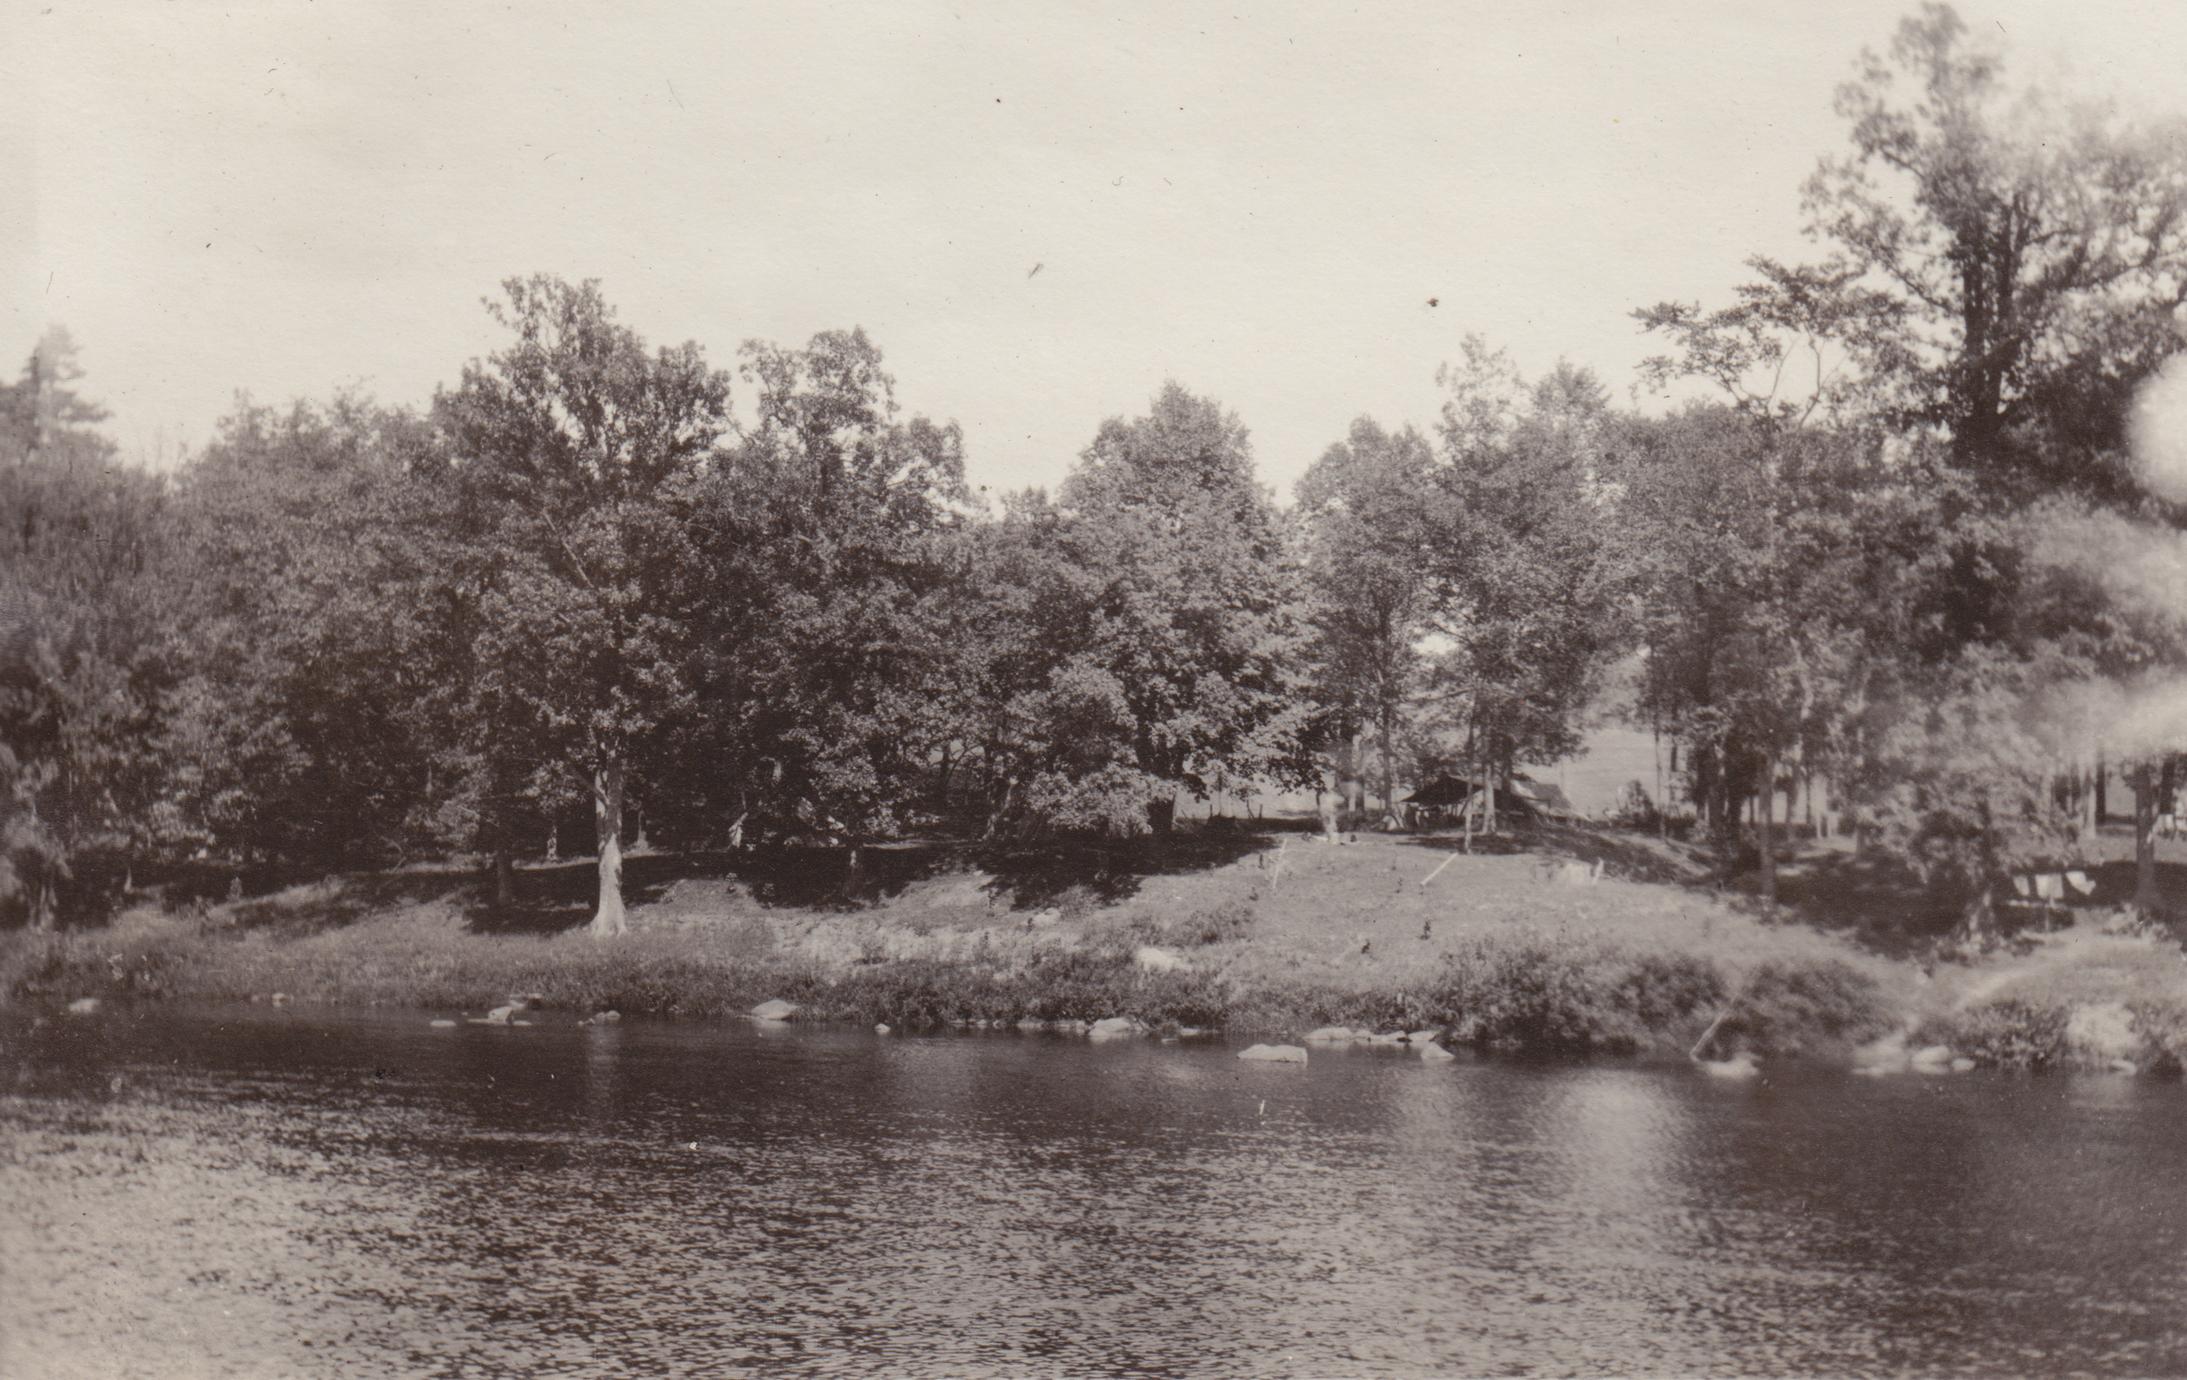 1918 Training camp along the Black River